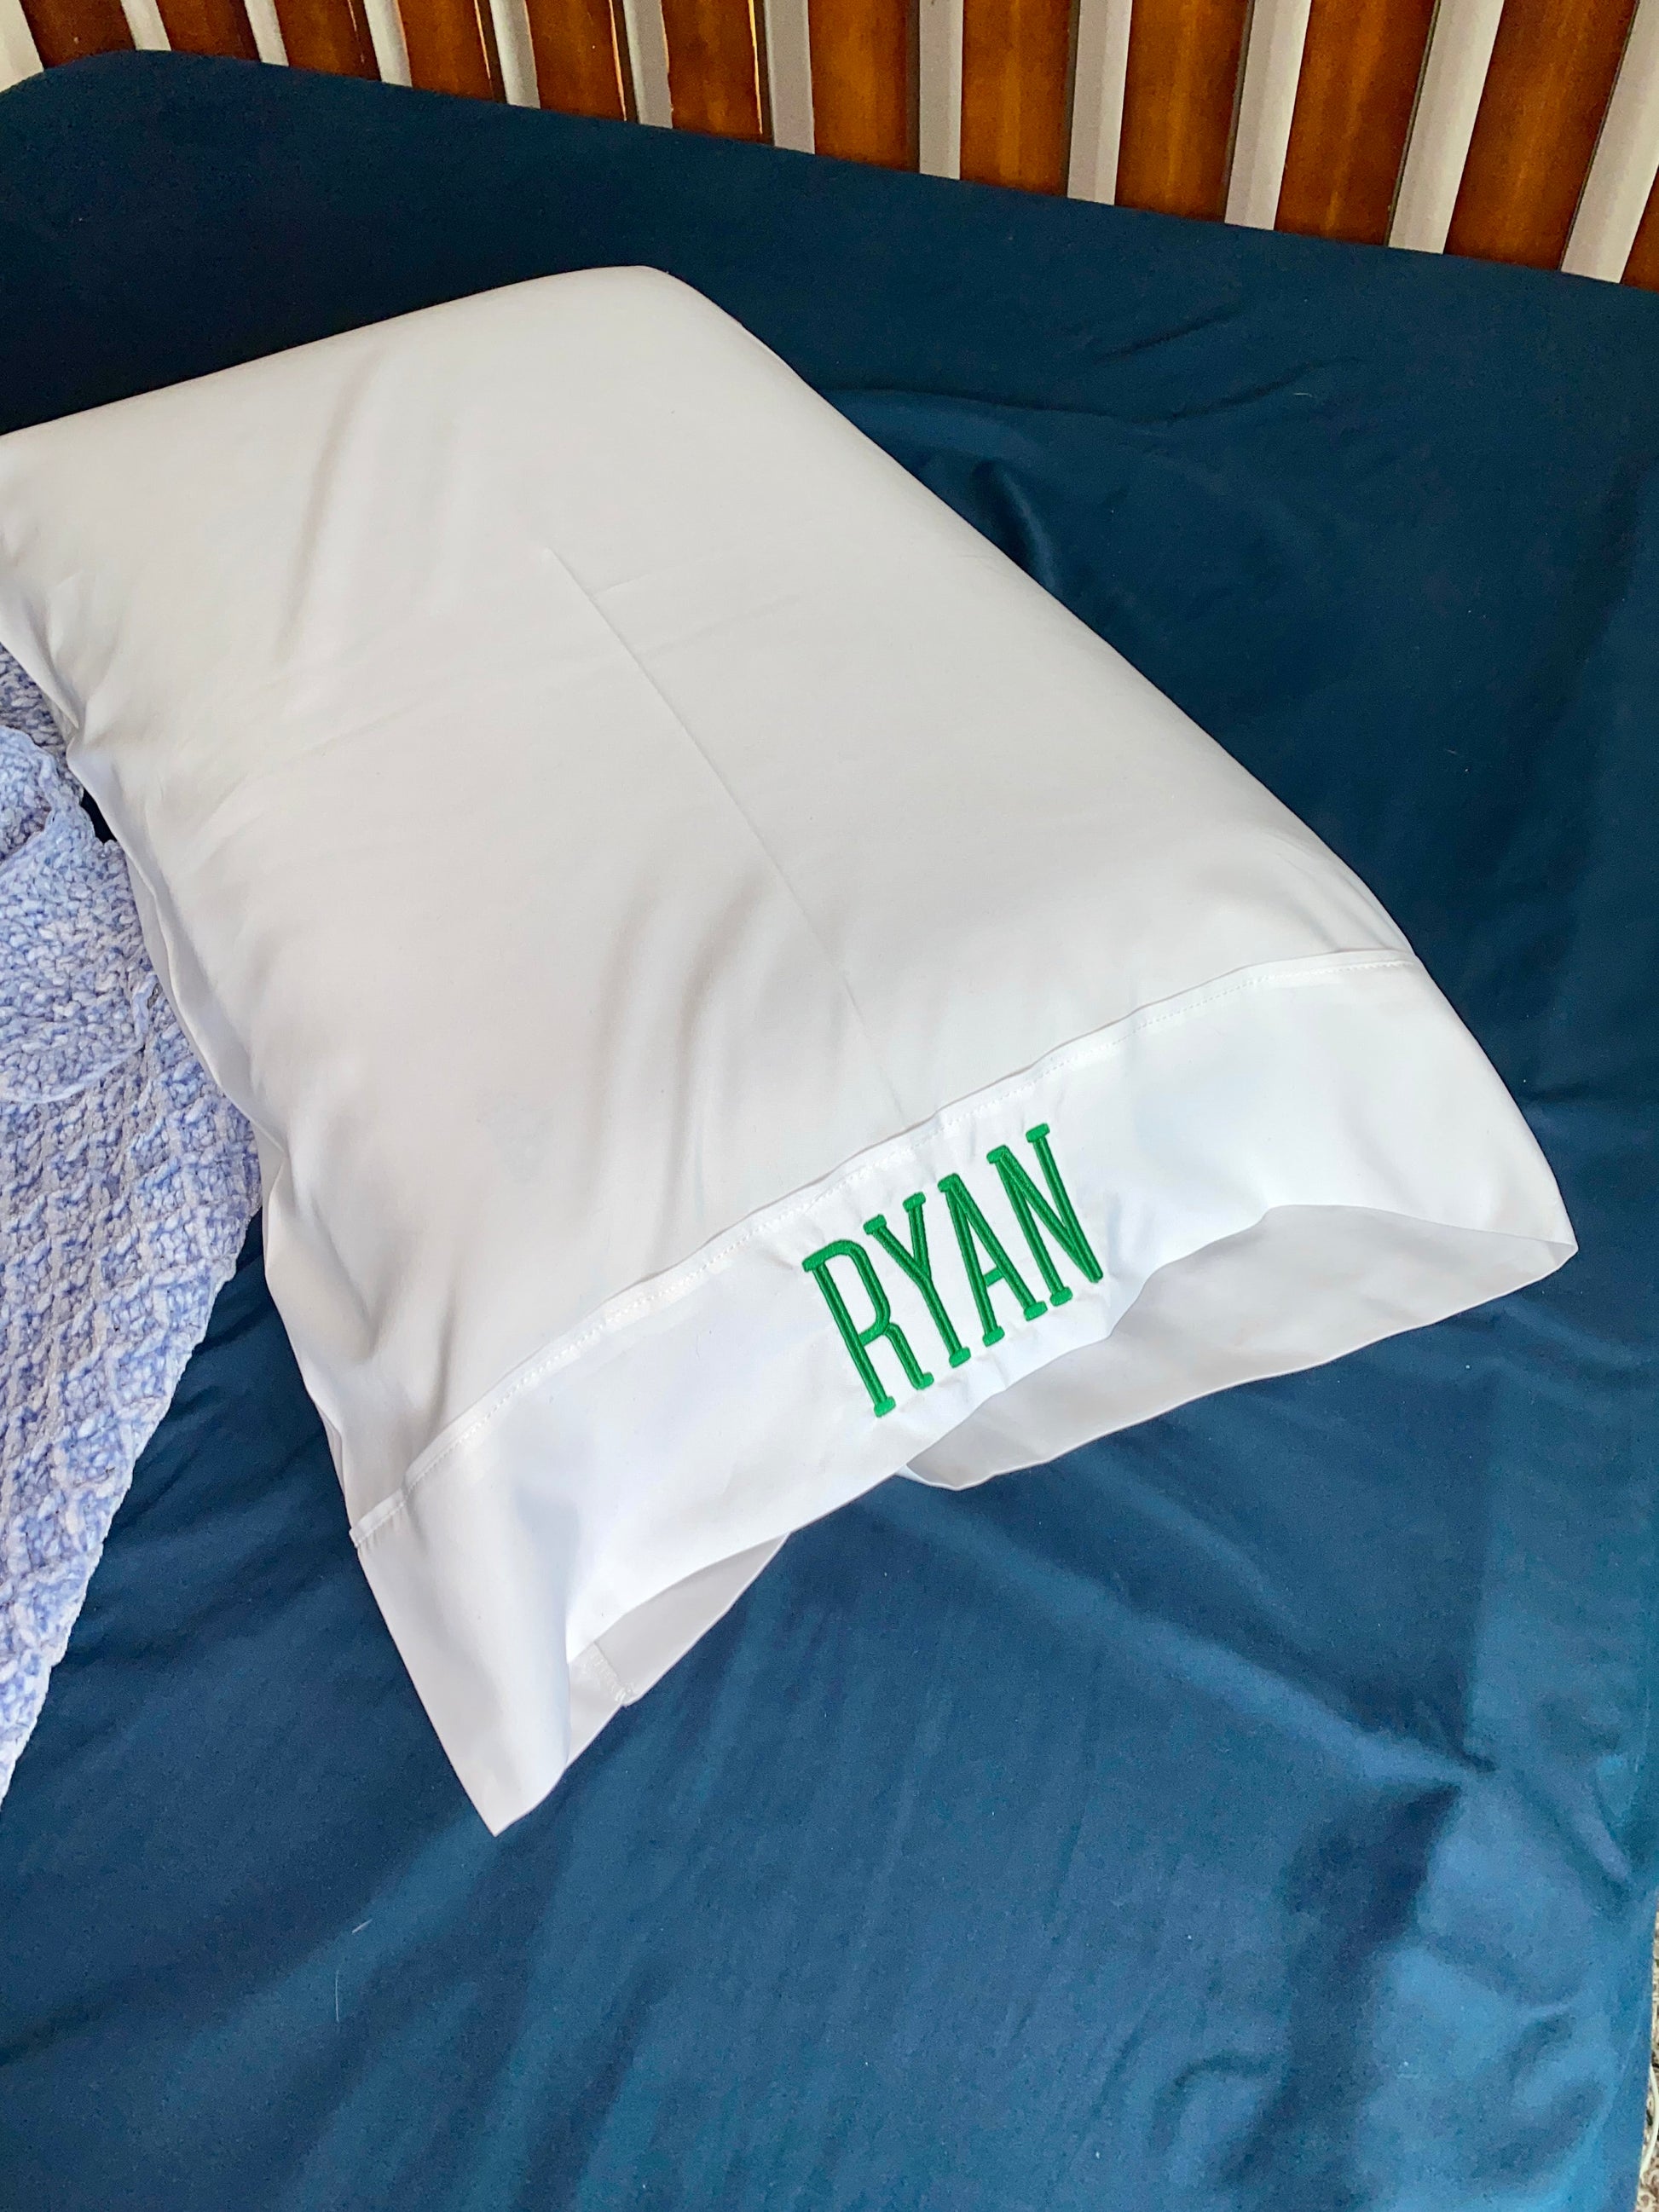 Monogrammed Pillowcase for Travelers, Embroidered Pillow Cover for camping, Customized pillowcase for Road Trips, Summer Camp Personalized